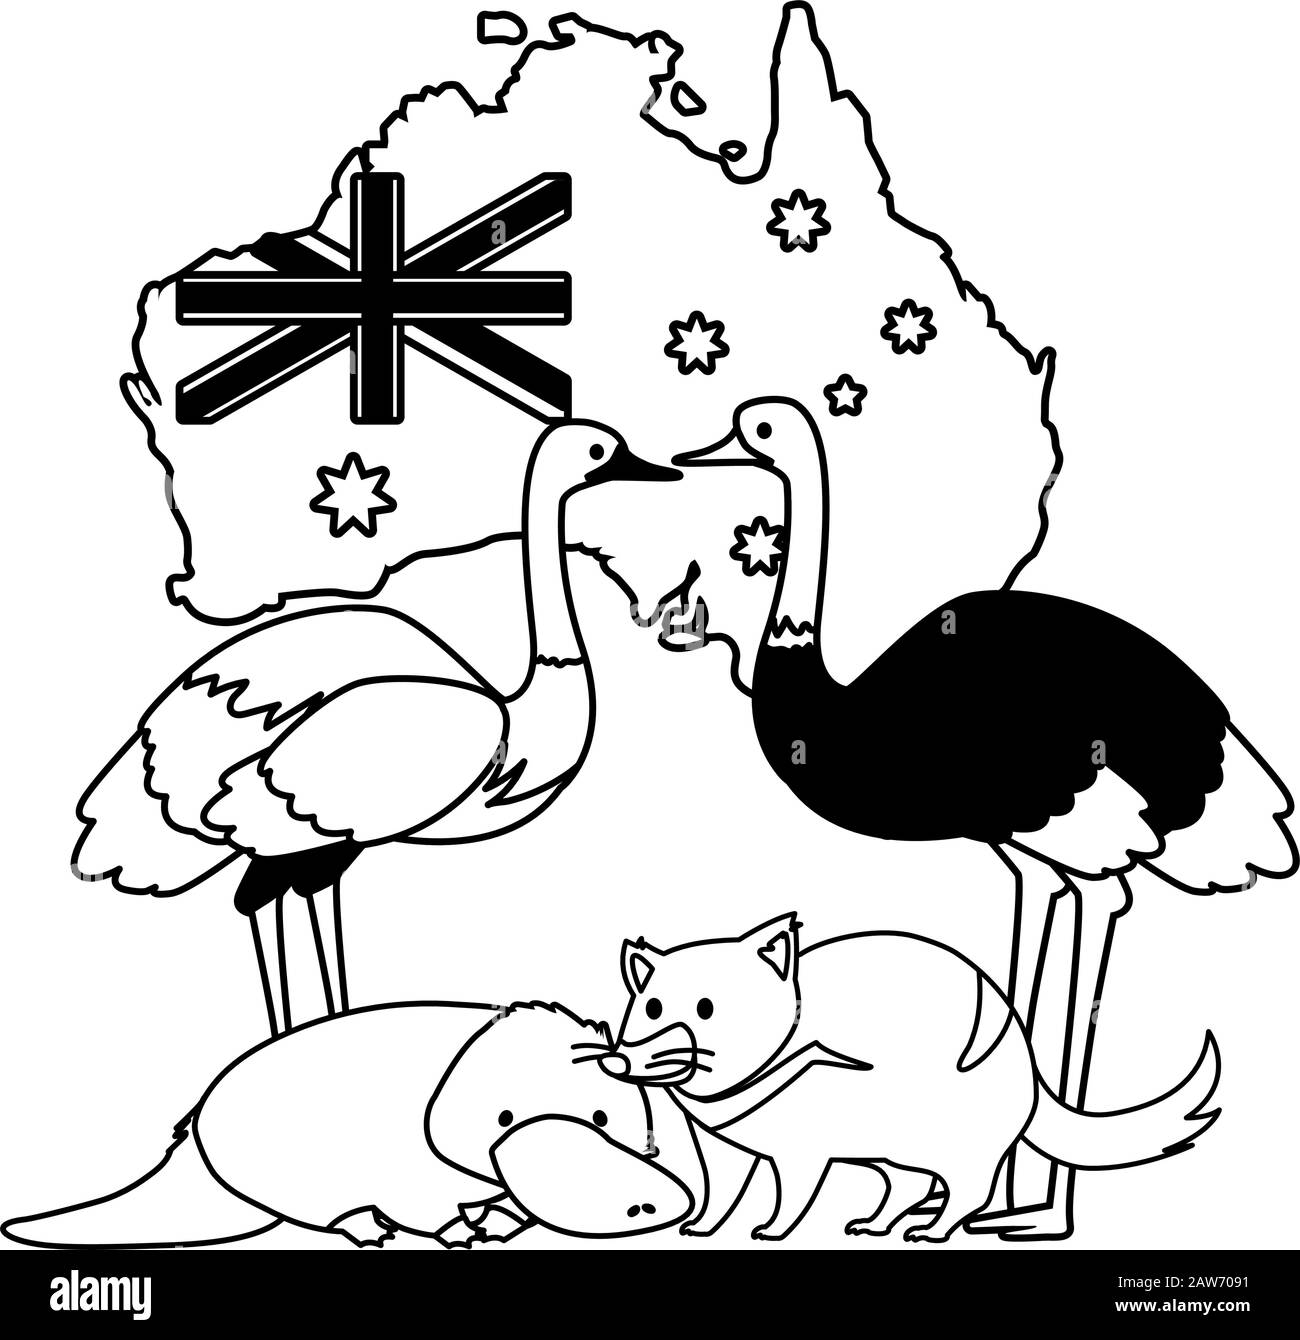 animals-of-australia-with-map-of-australia-in-the-background-vector